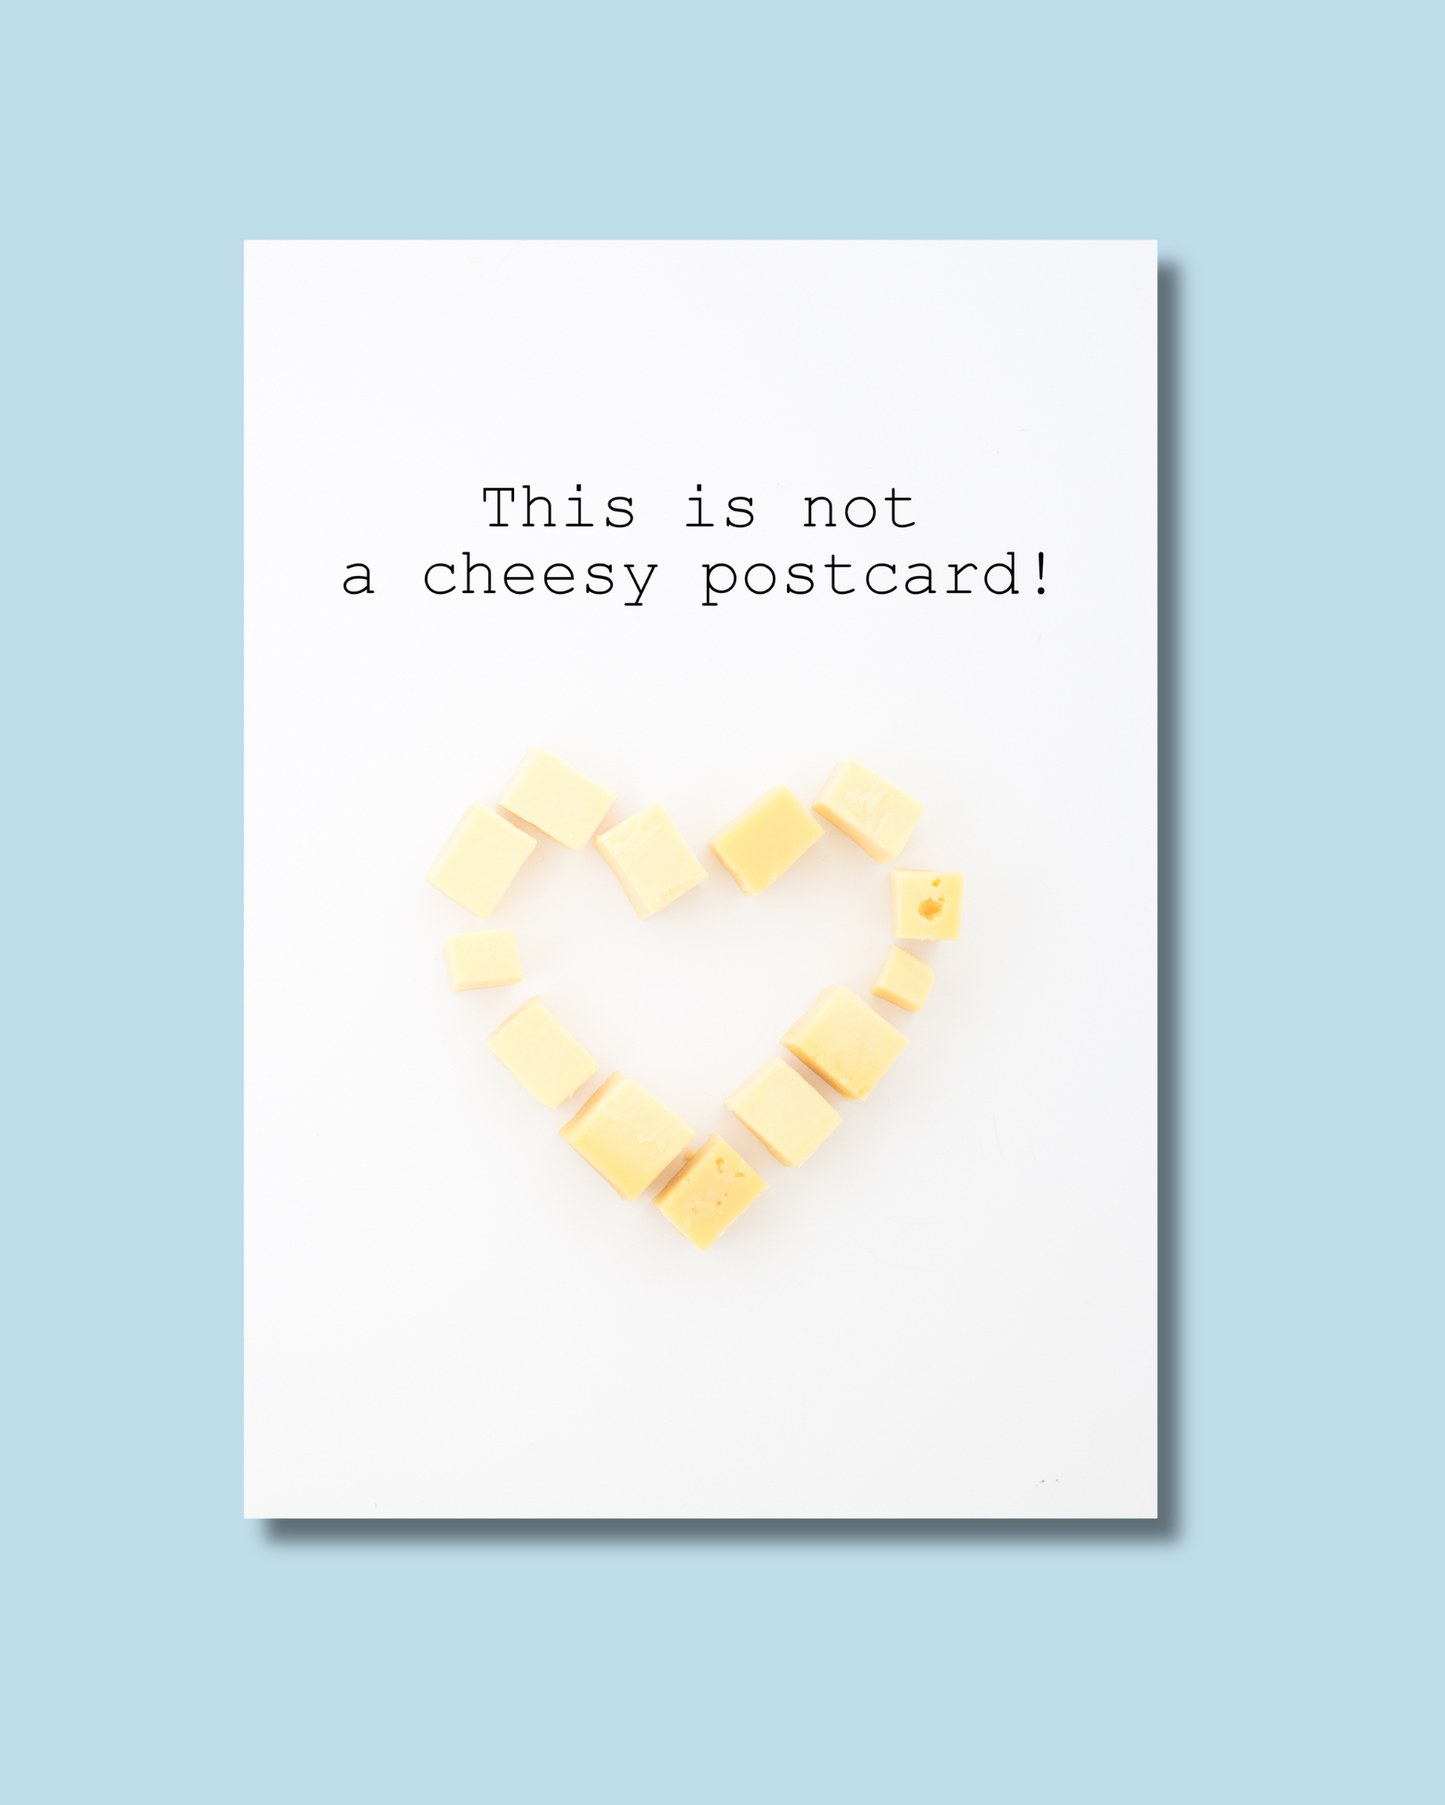 This is not a cheesy postcard